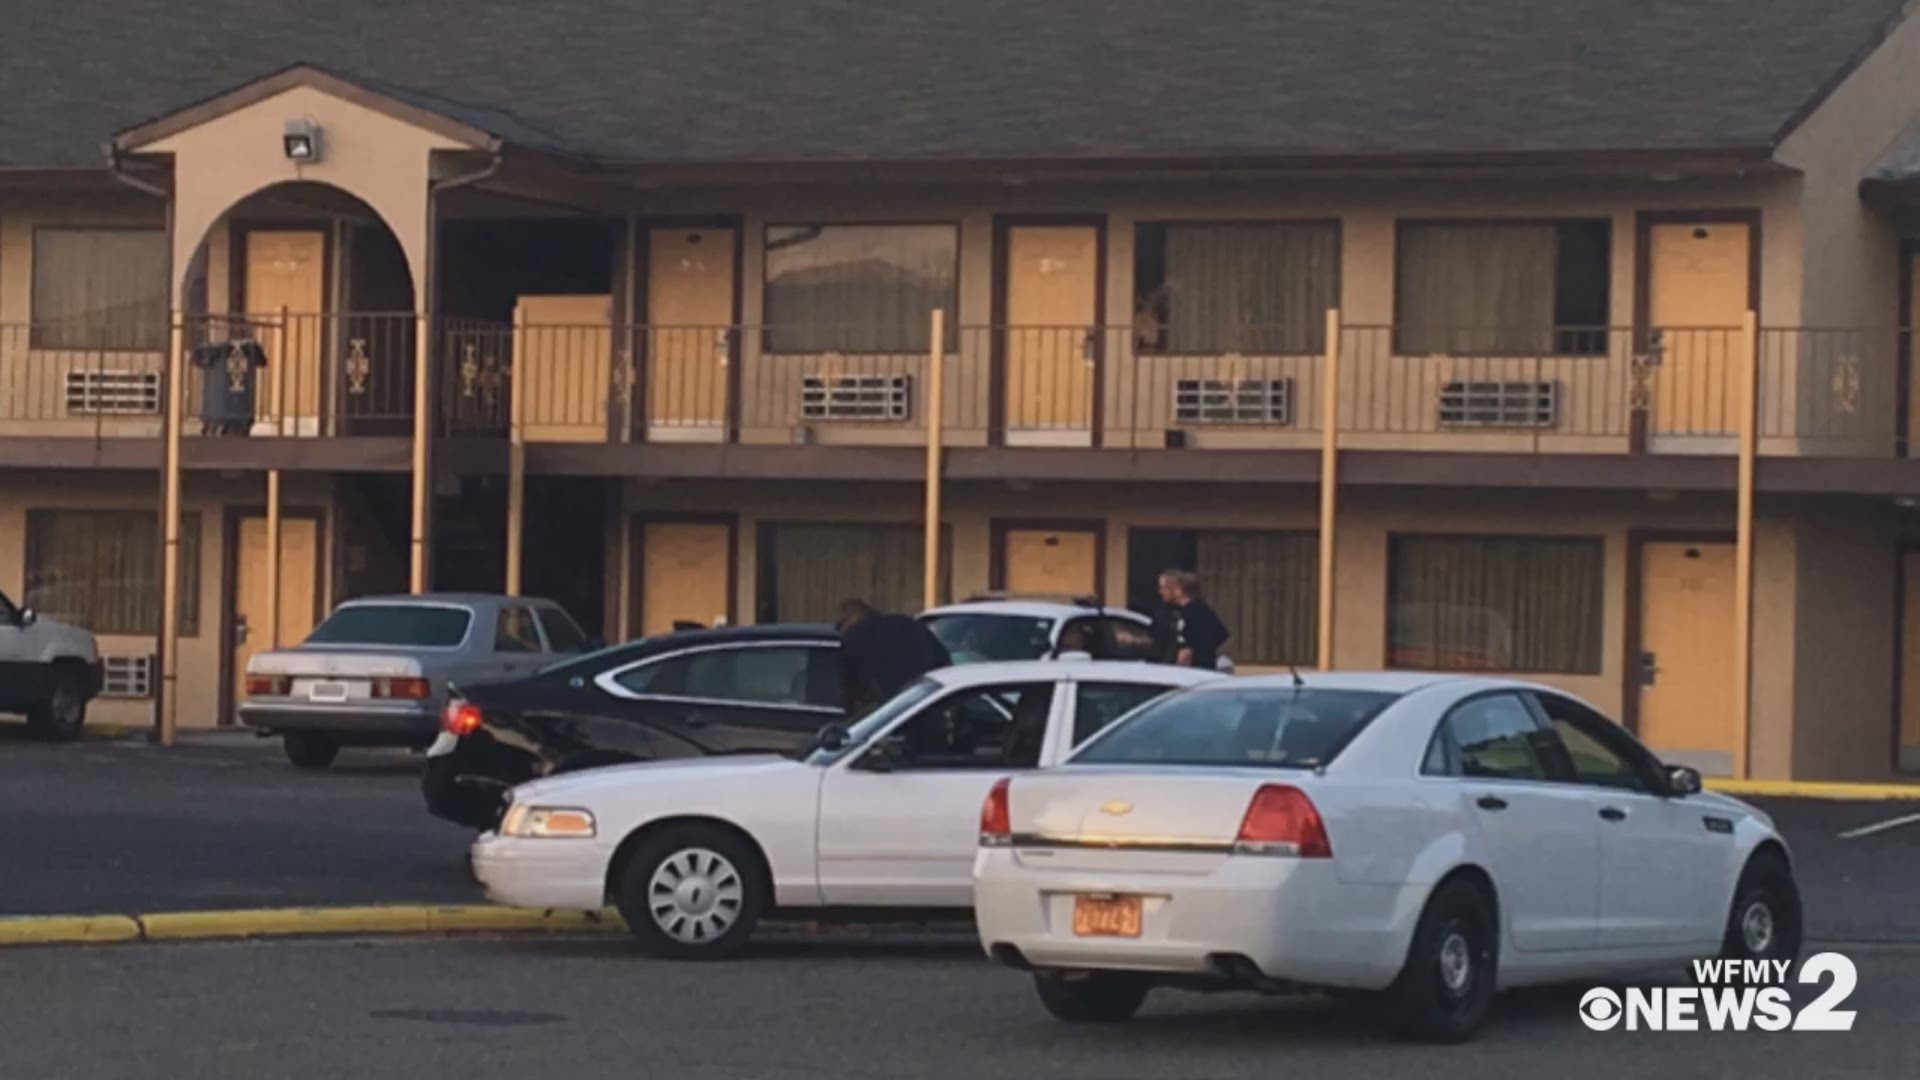 Winston Salem police are investigating a homicide. It happened early Friday morning around 1:00 a.m. at The Travelers Inn on University Parkway. Police say someone found a body lying in the parking lot and called 911.